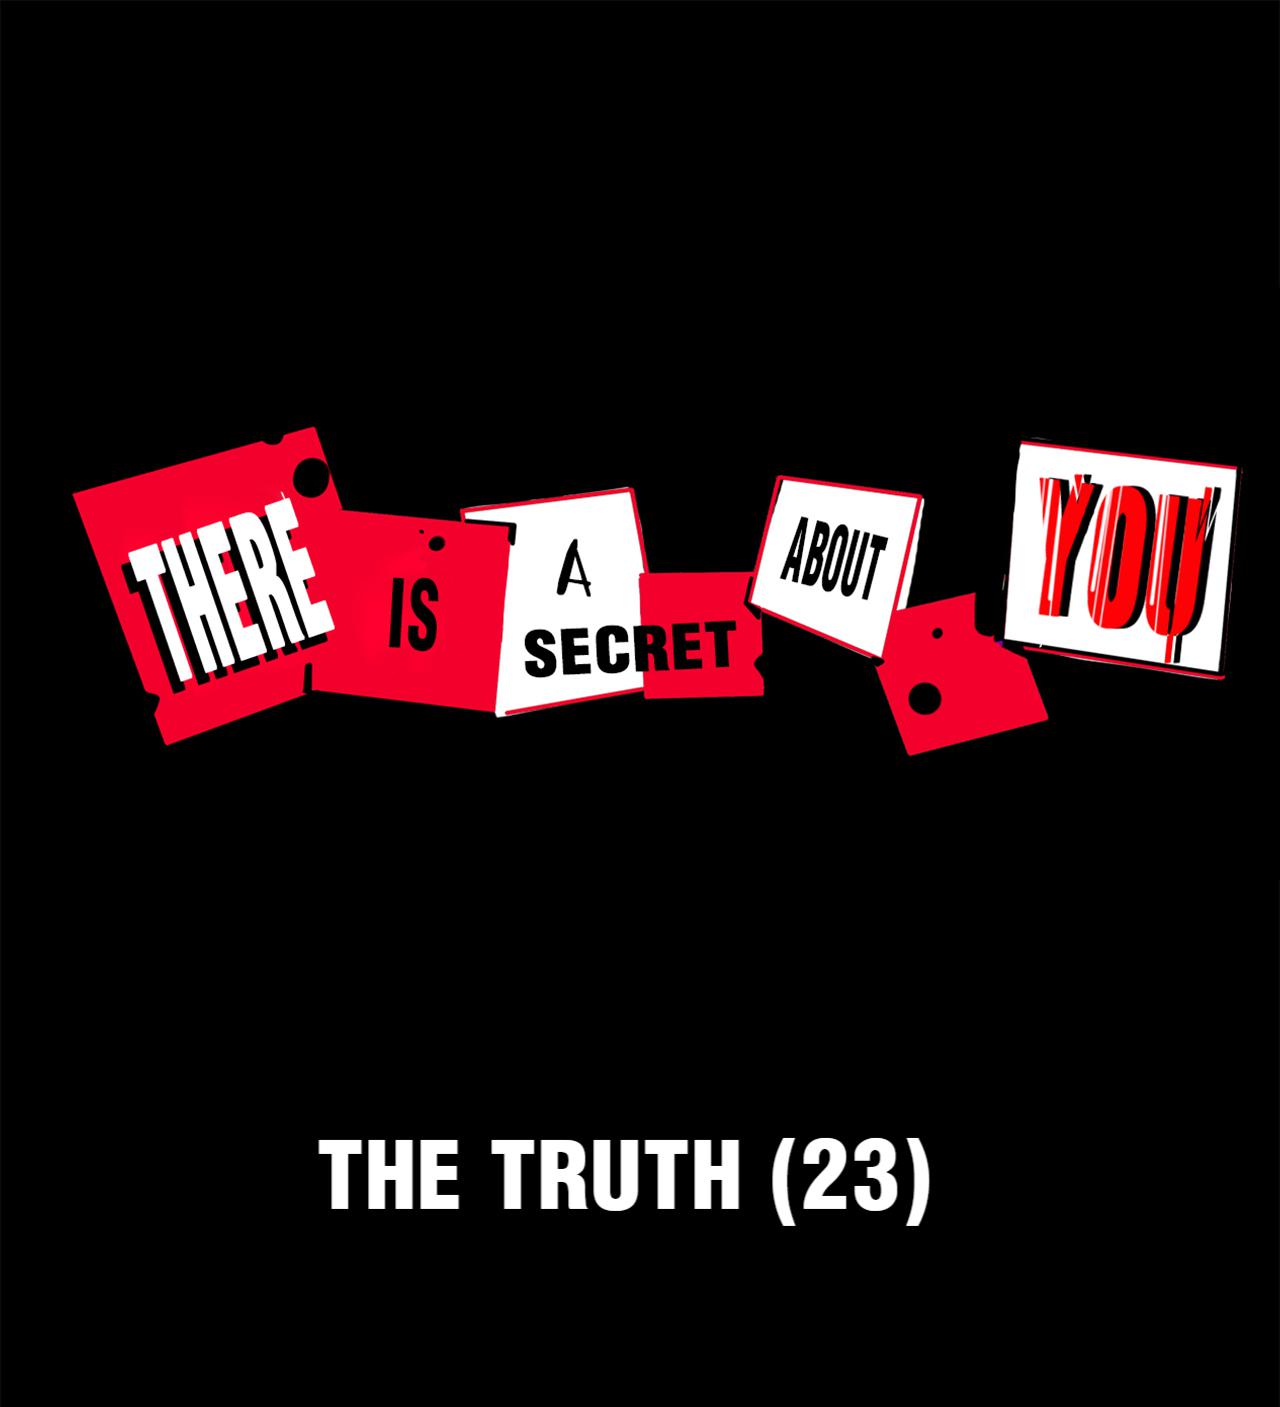 There Is a Secret About You 56